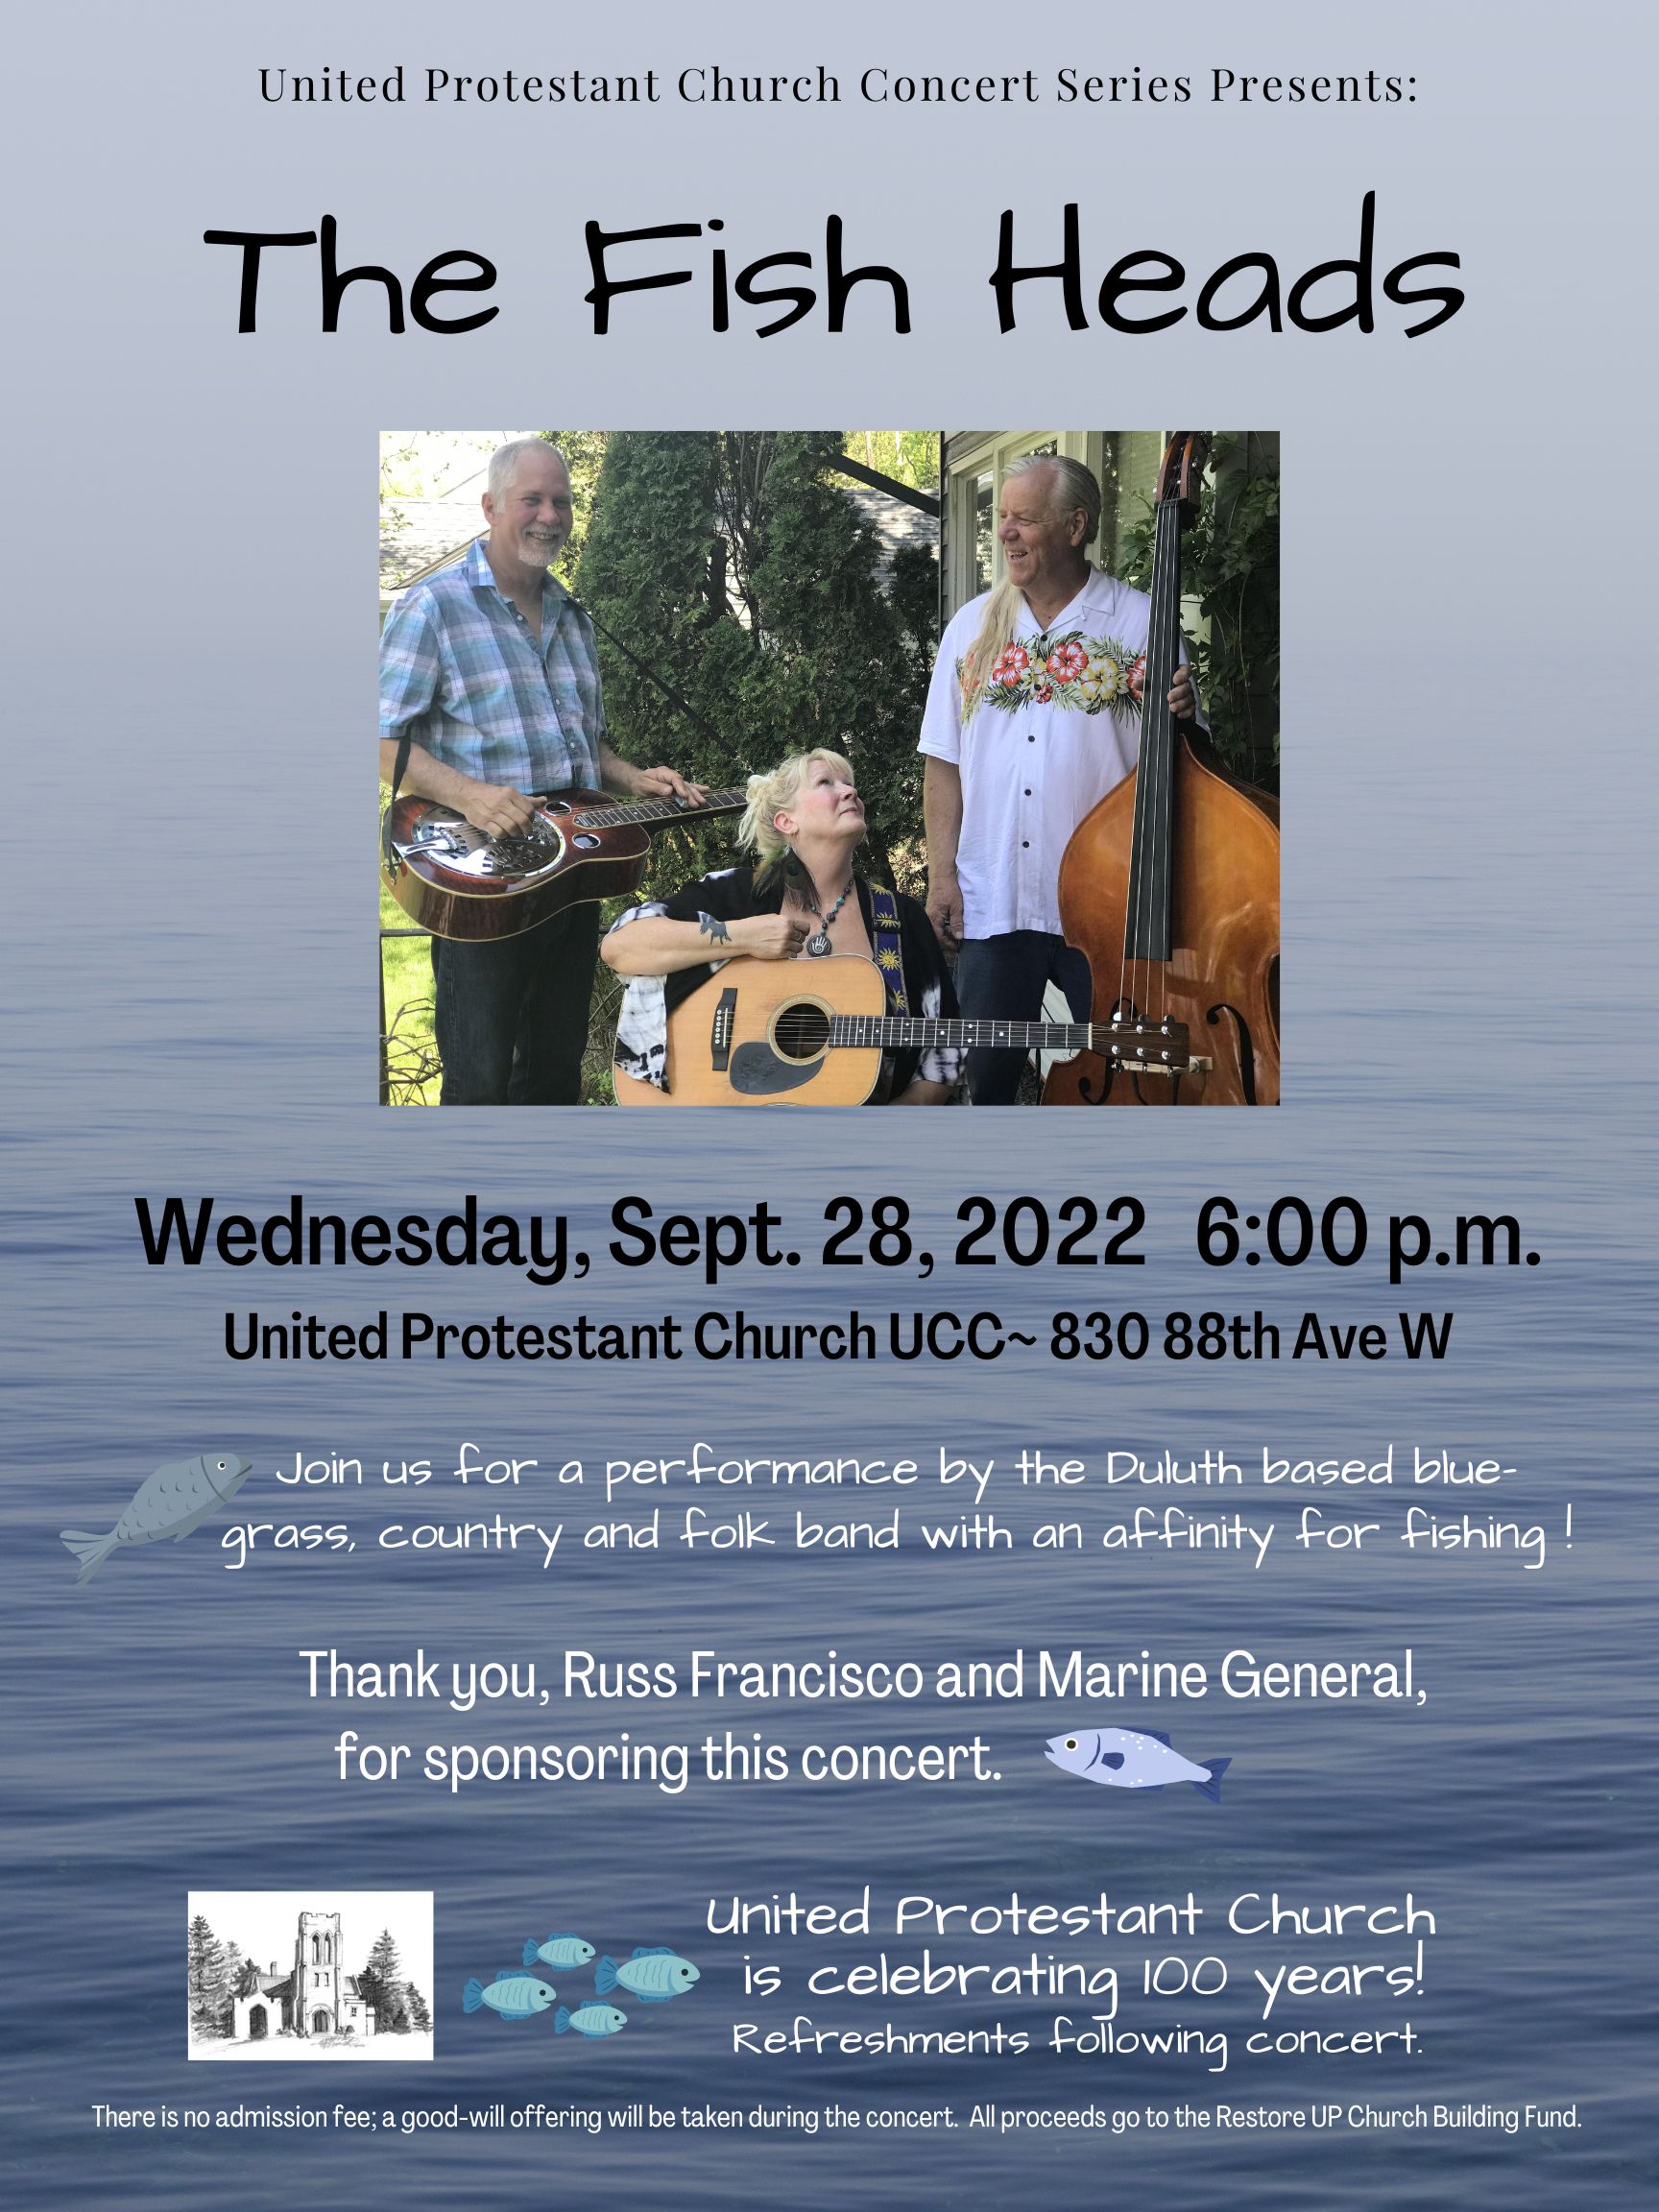 United Protestant Church presents The Fish Heads